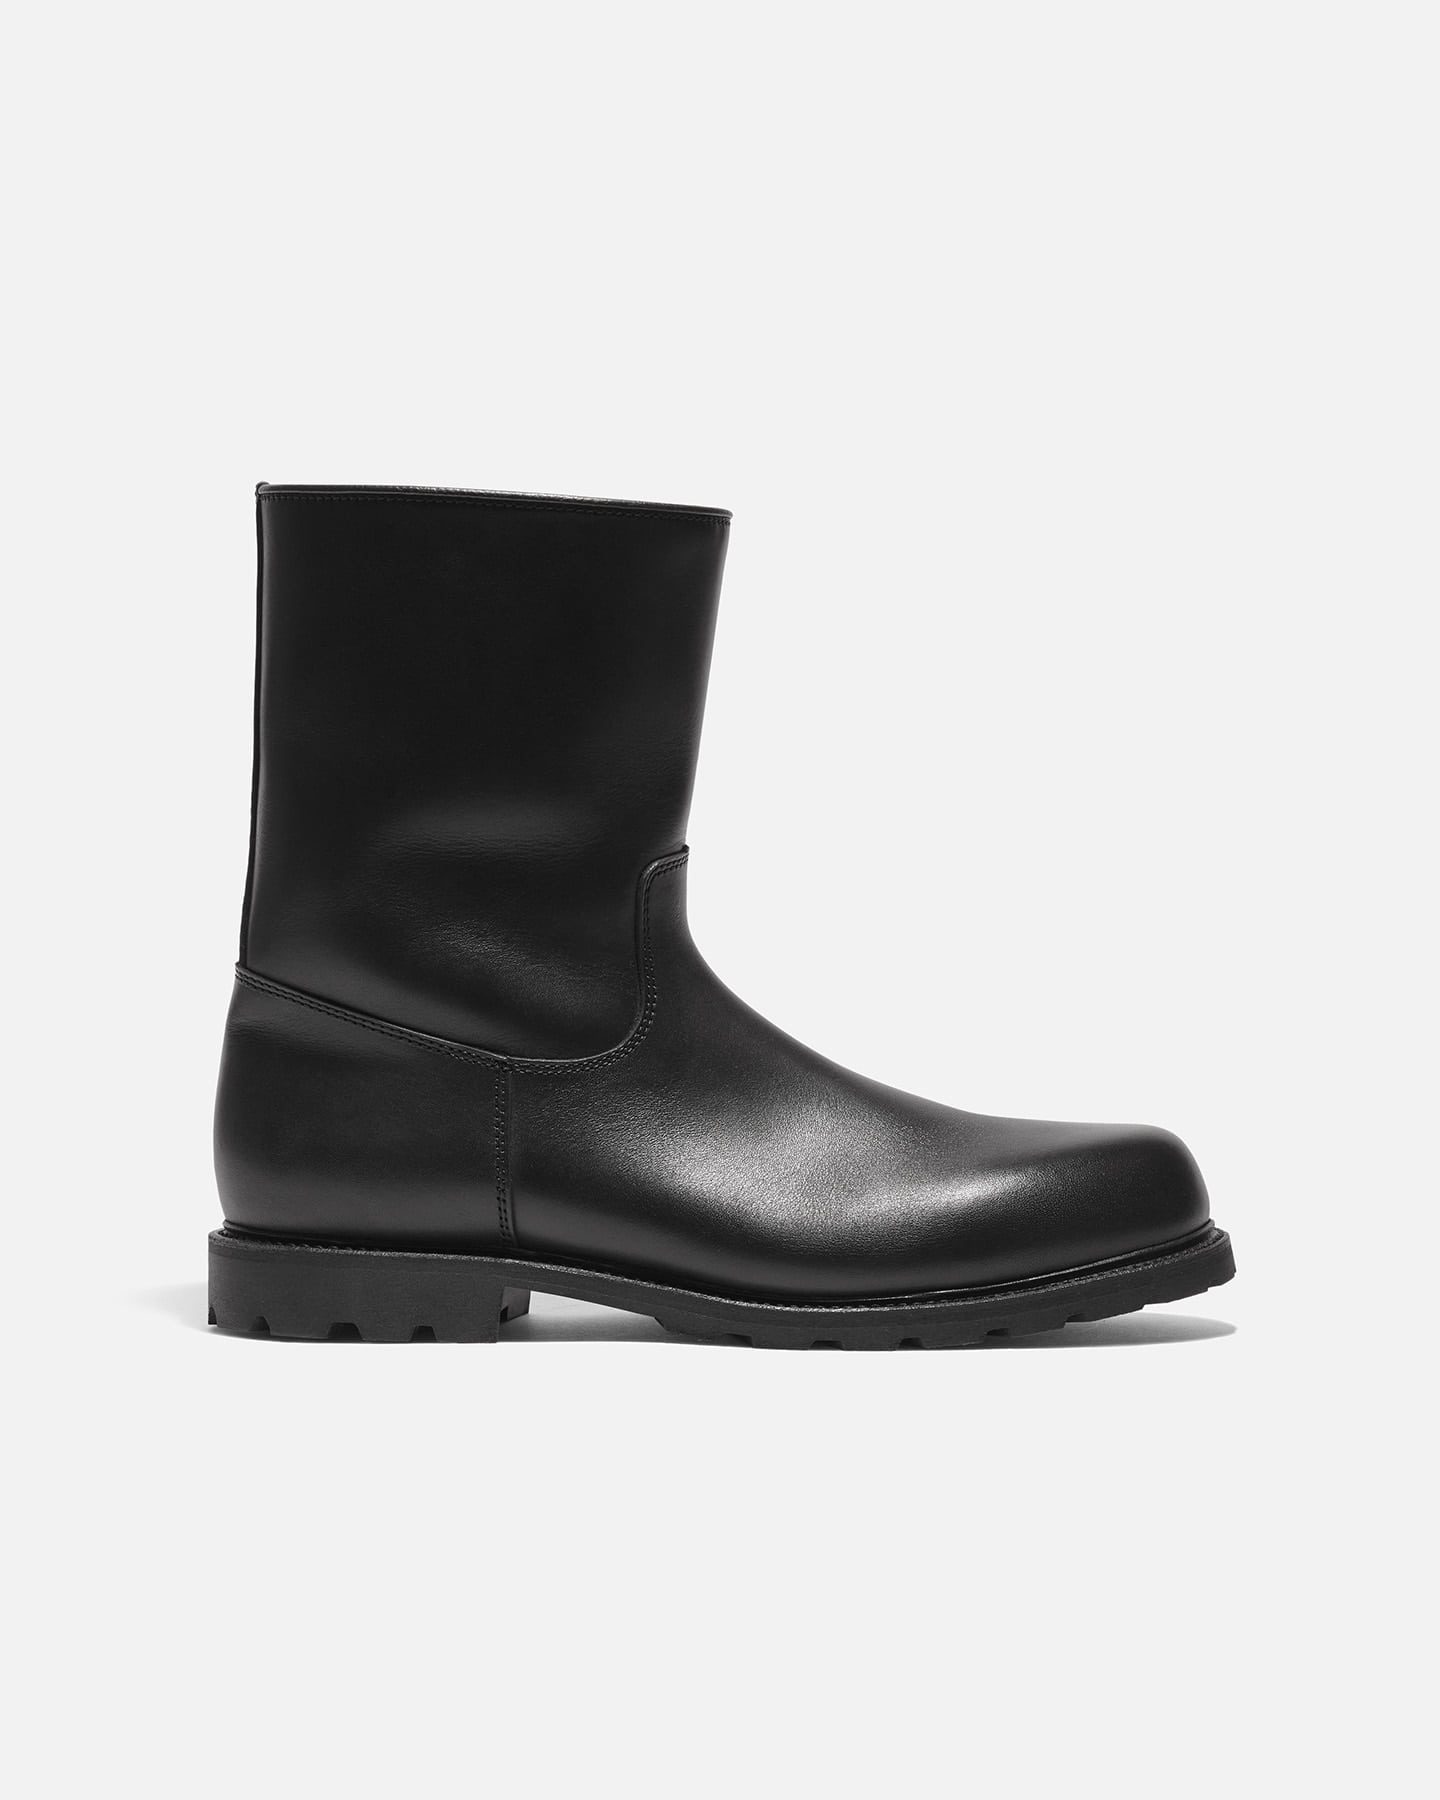 City boots black with leather lining_02